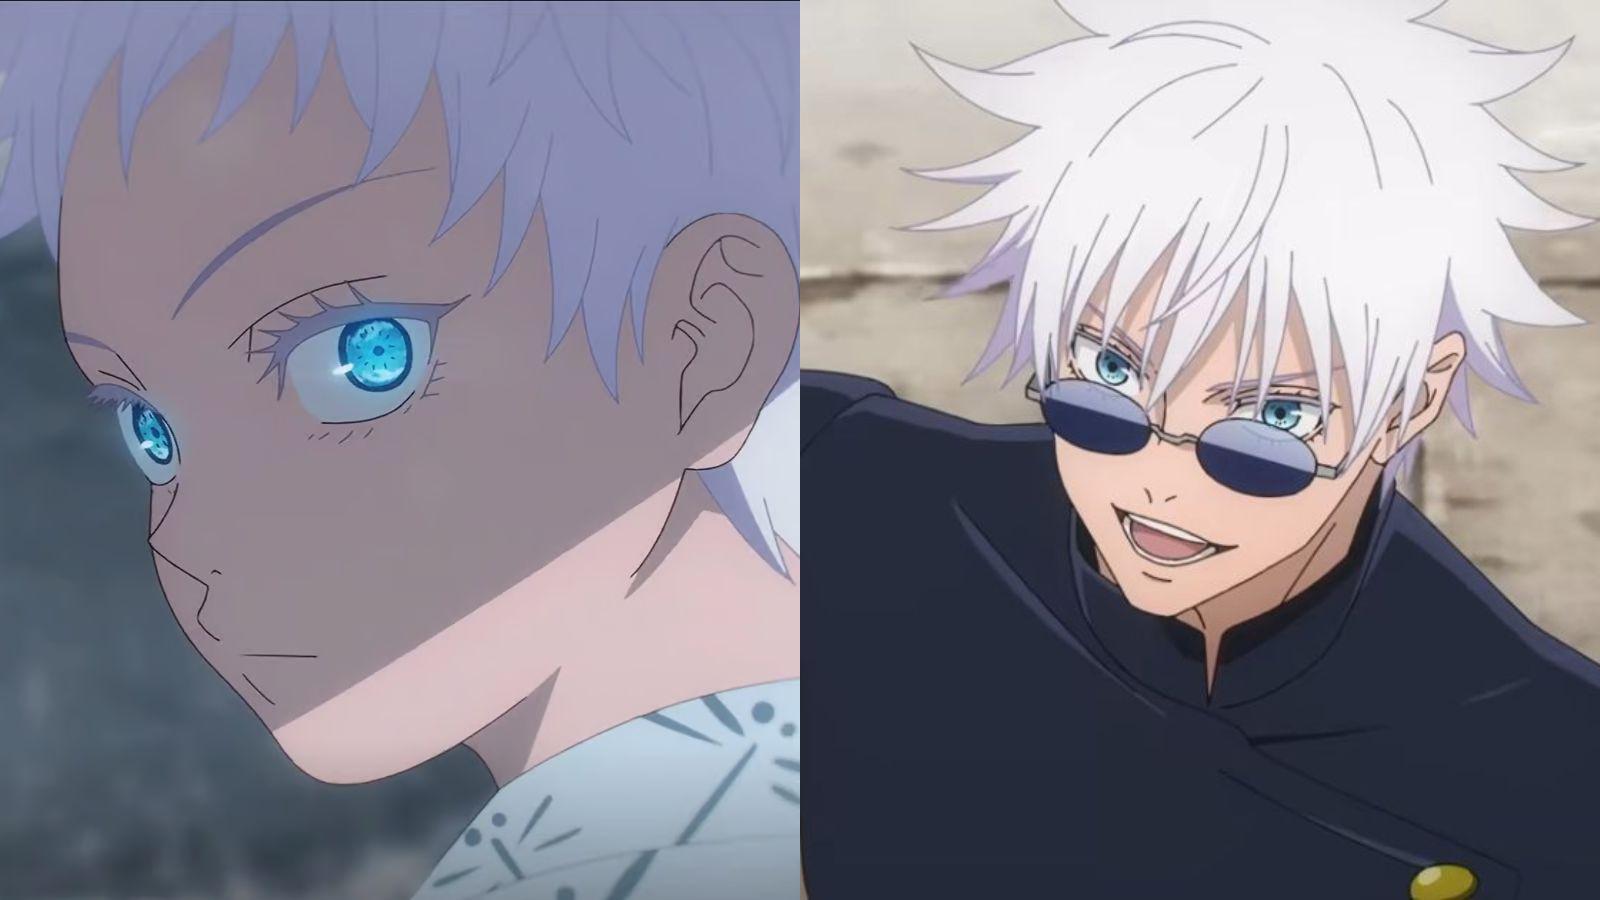 Jujutsu Kaisen Finally Reveals the Abilities of Its Last Great Sorcerer